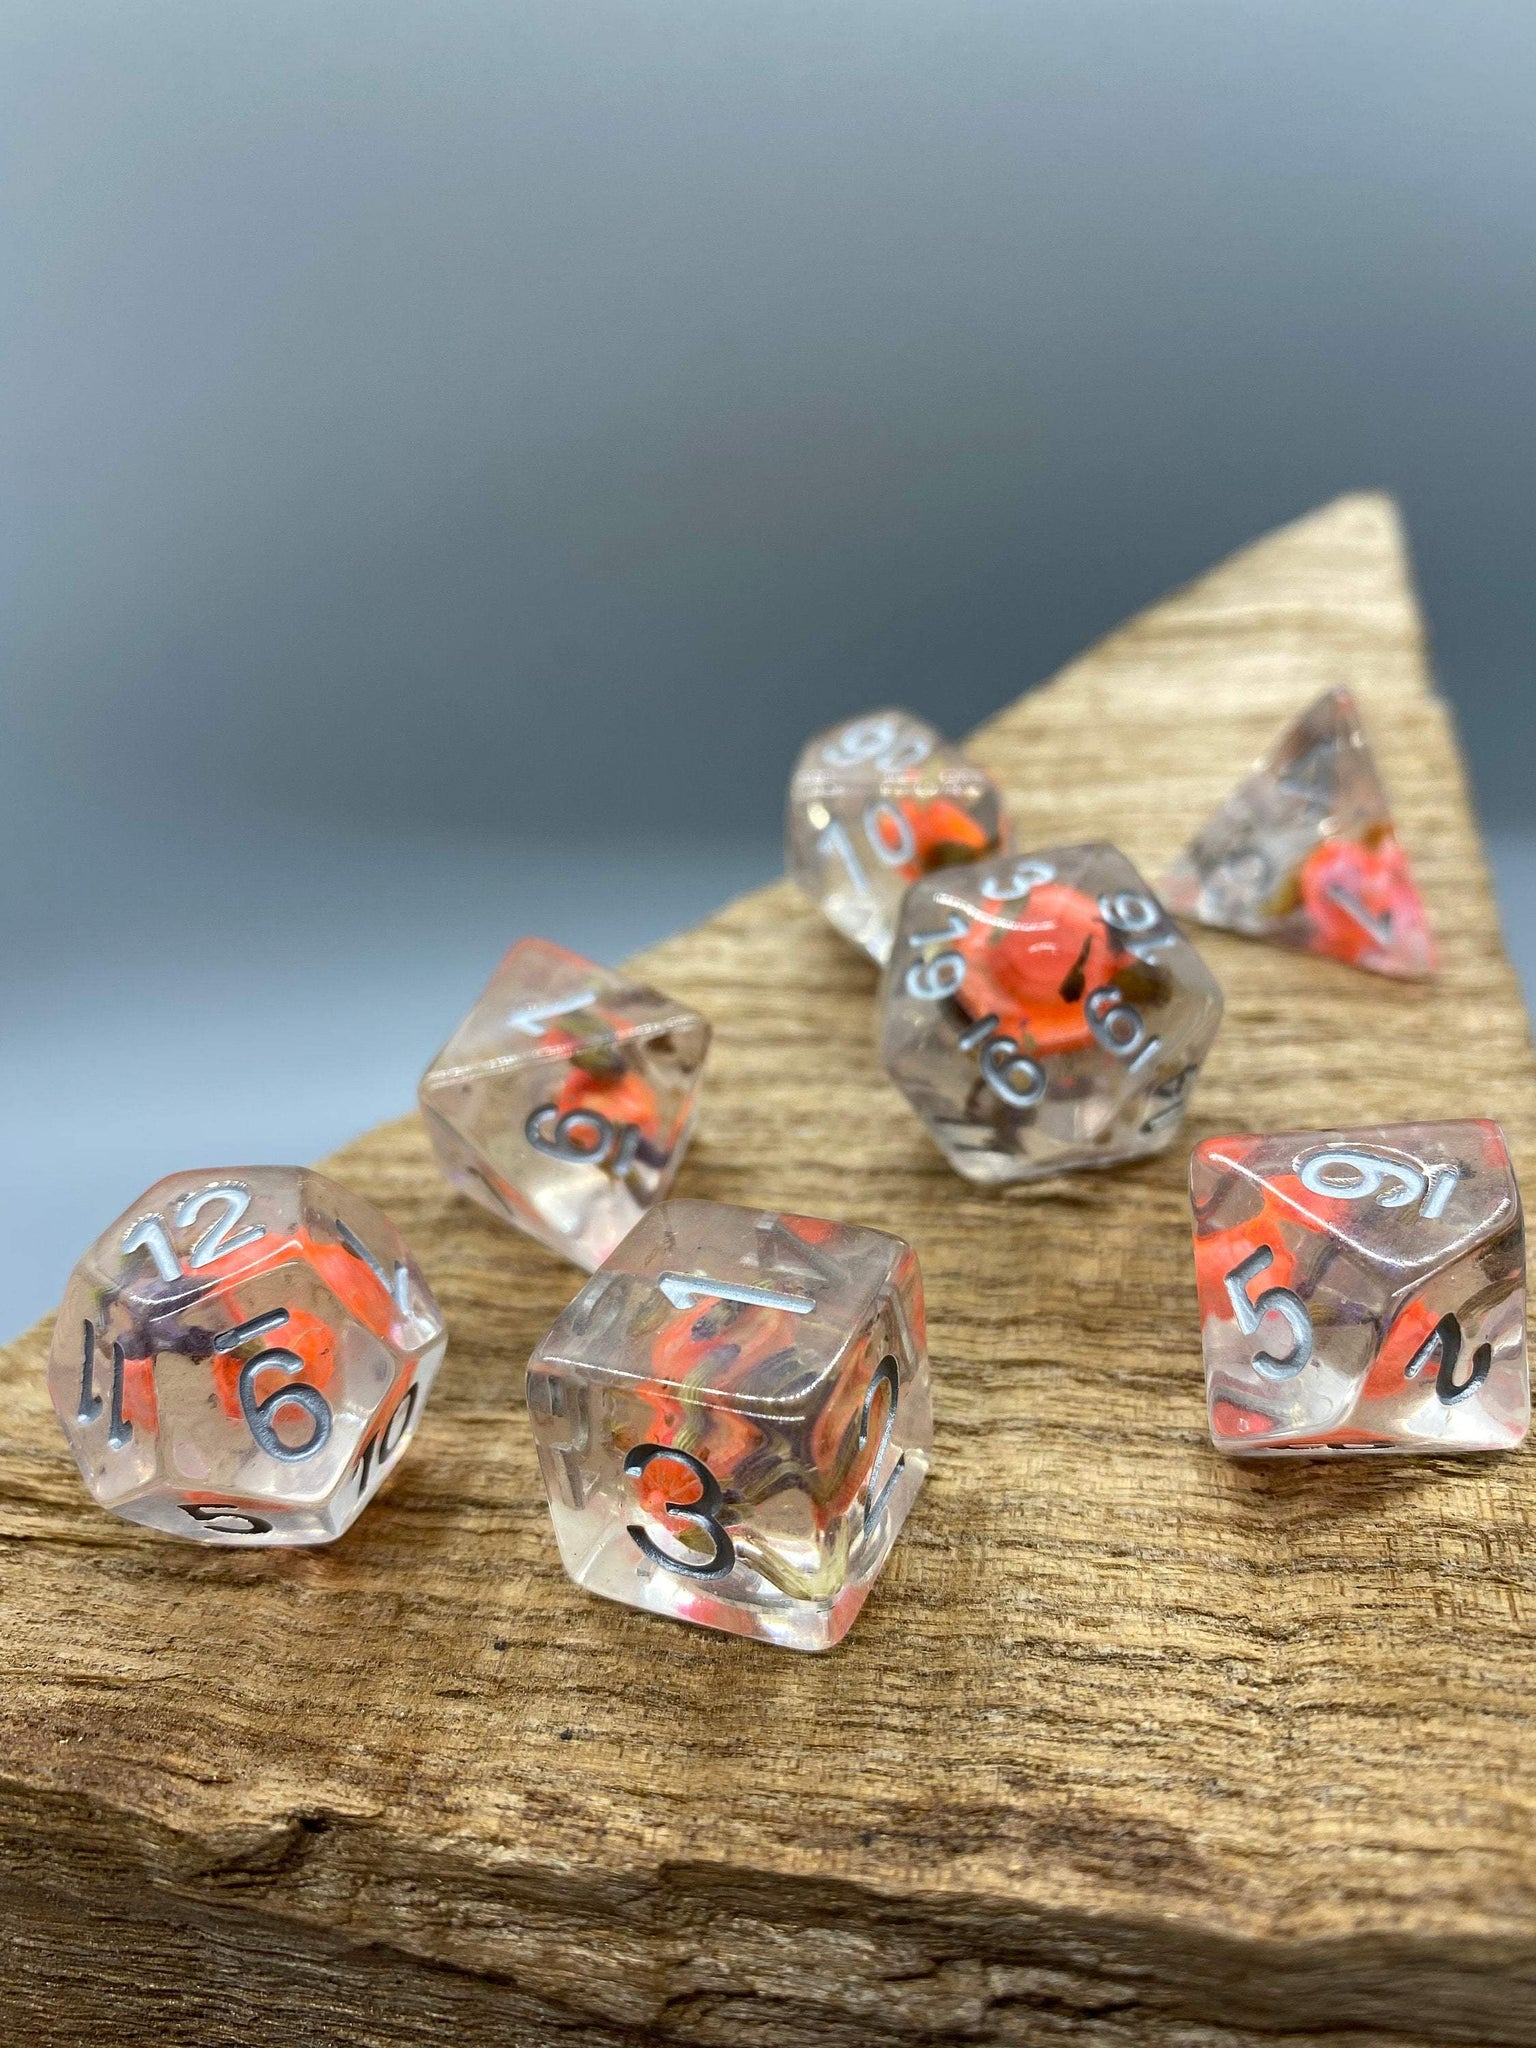 Lavender and Orange with Real Flowers Polyhedral Resin Dice Set.   Complete set. - BeausBricks